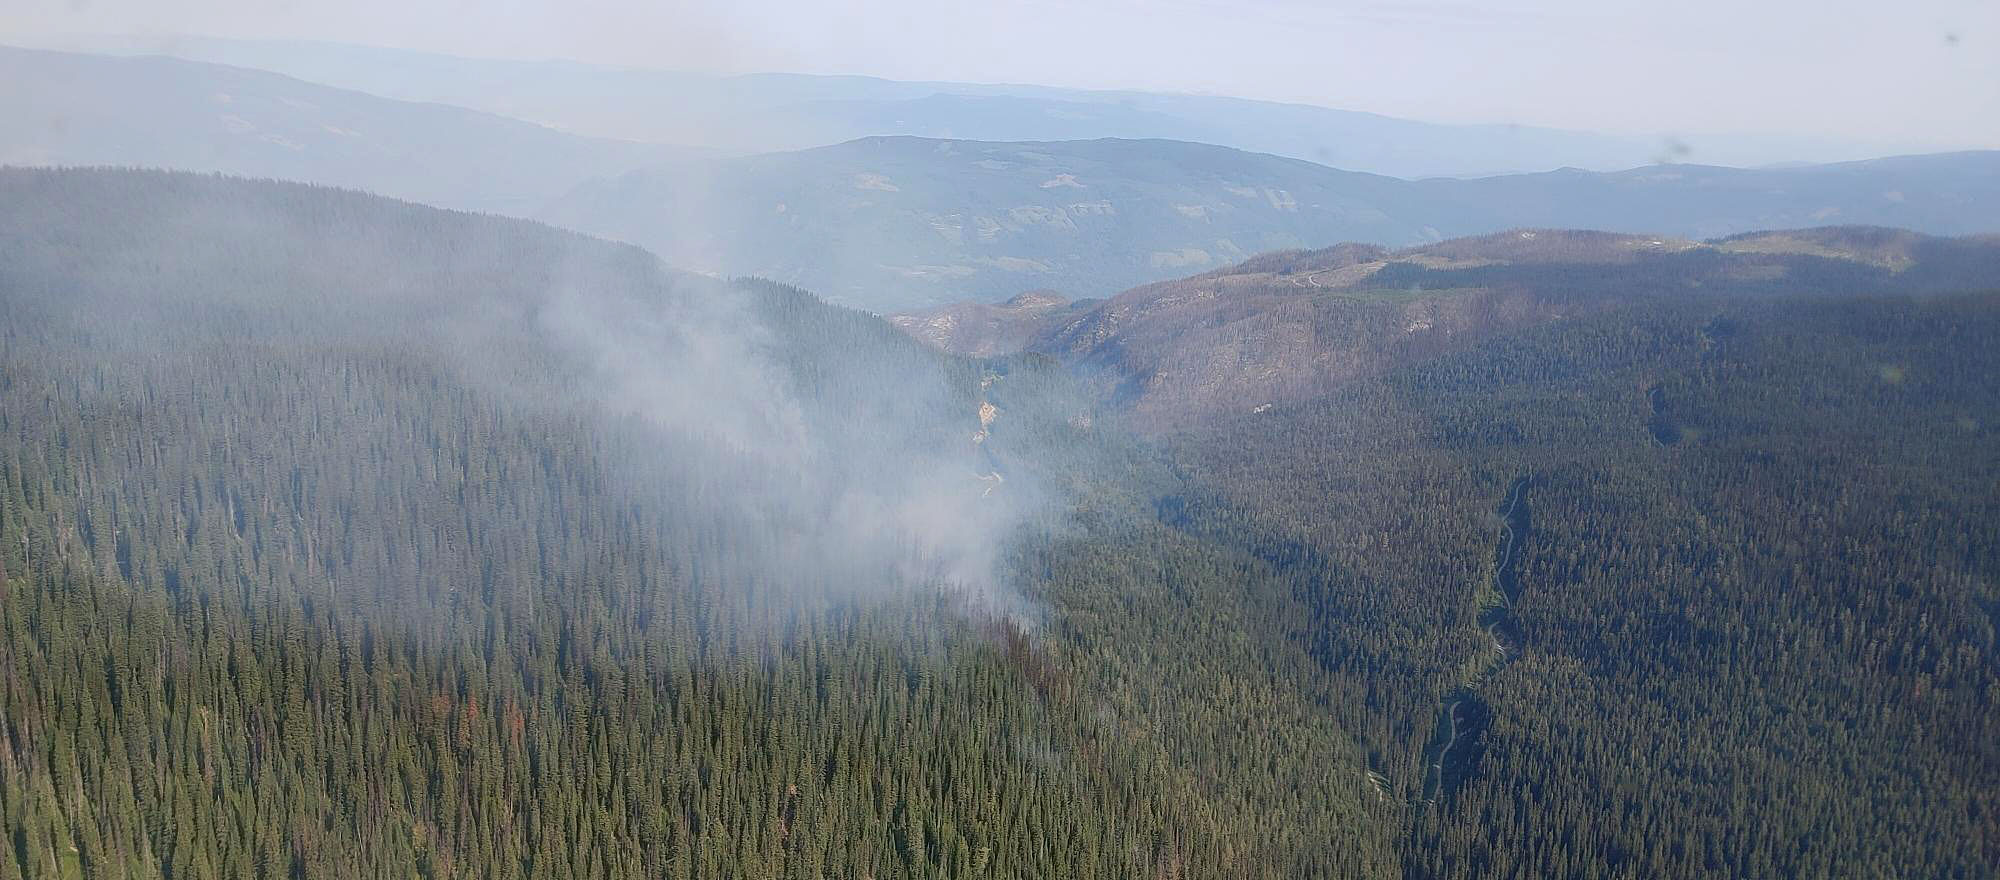 Slow-burning blaze near Sicamous being monitored: BC Wildfire Service